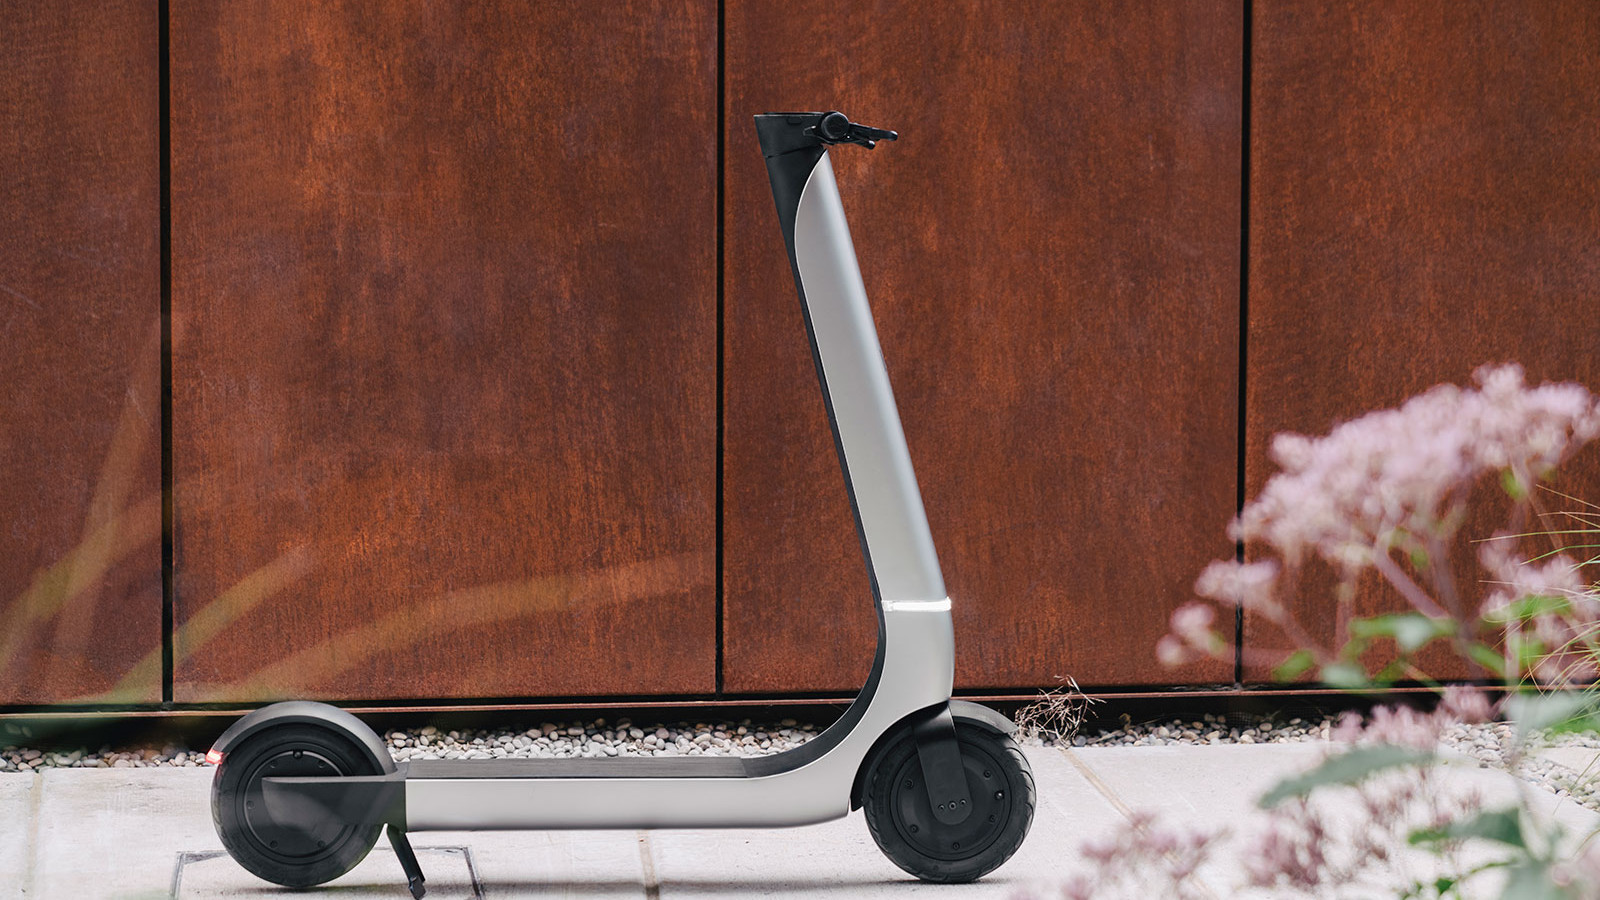 Bo M review: the new e-scooter designed to replace your car